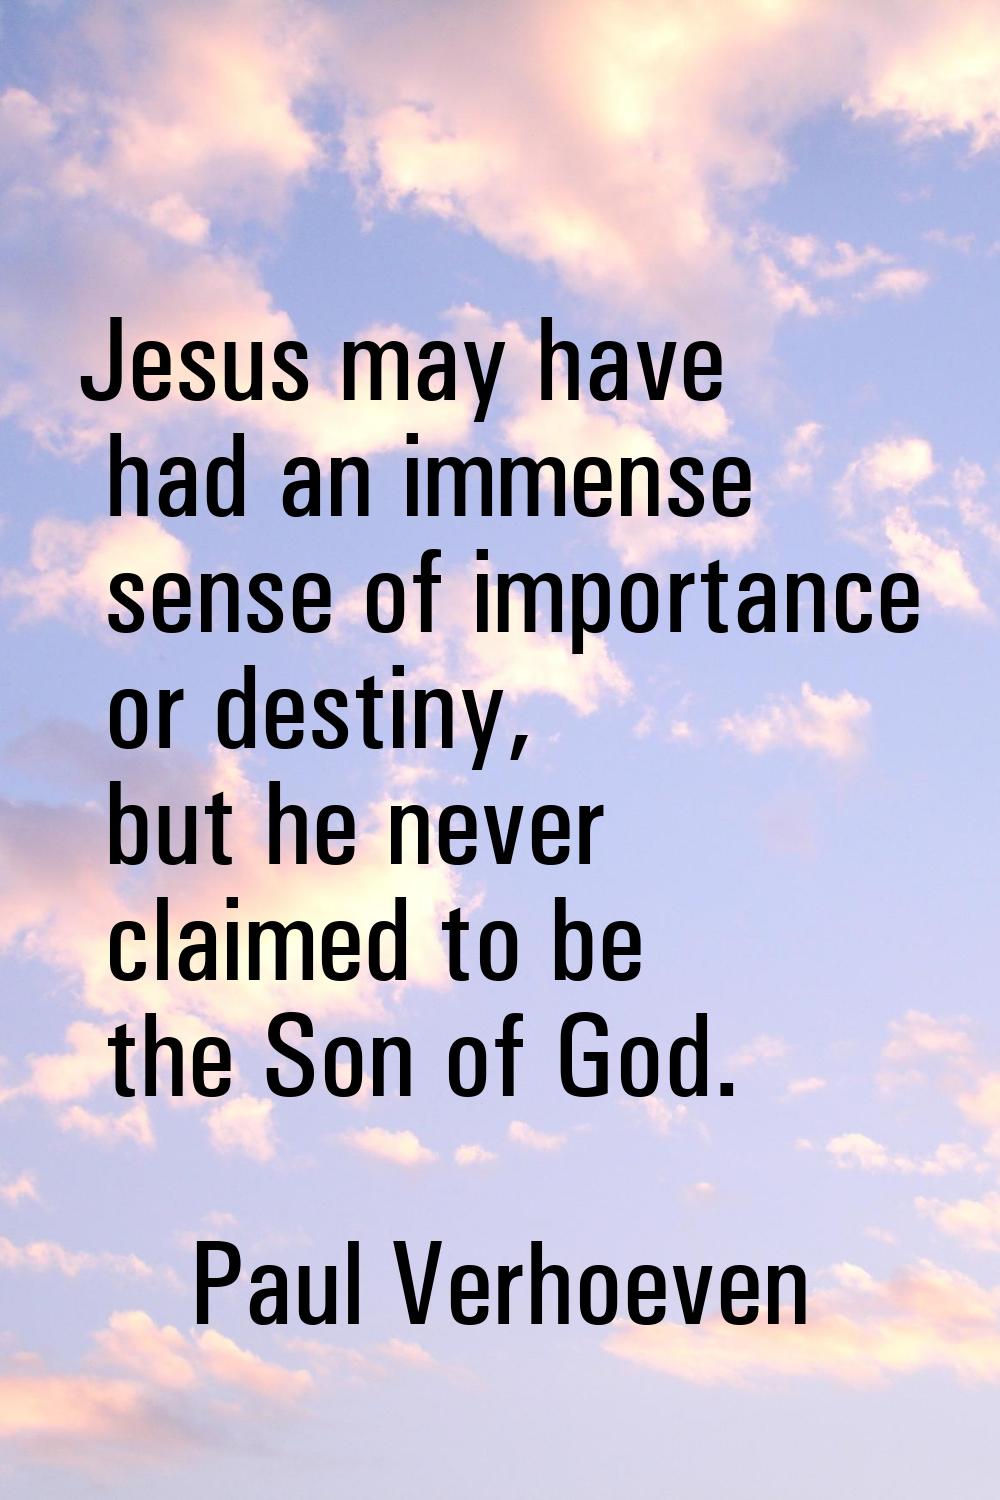 Jesus may have had an immense sense of importance or destiny, but he never claimed to be the Son of